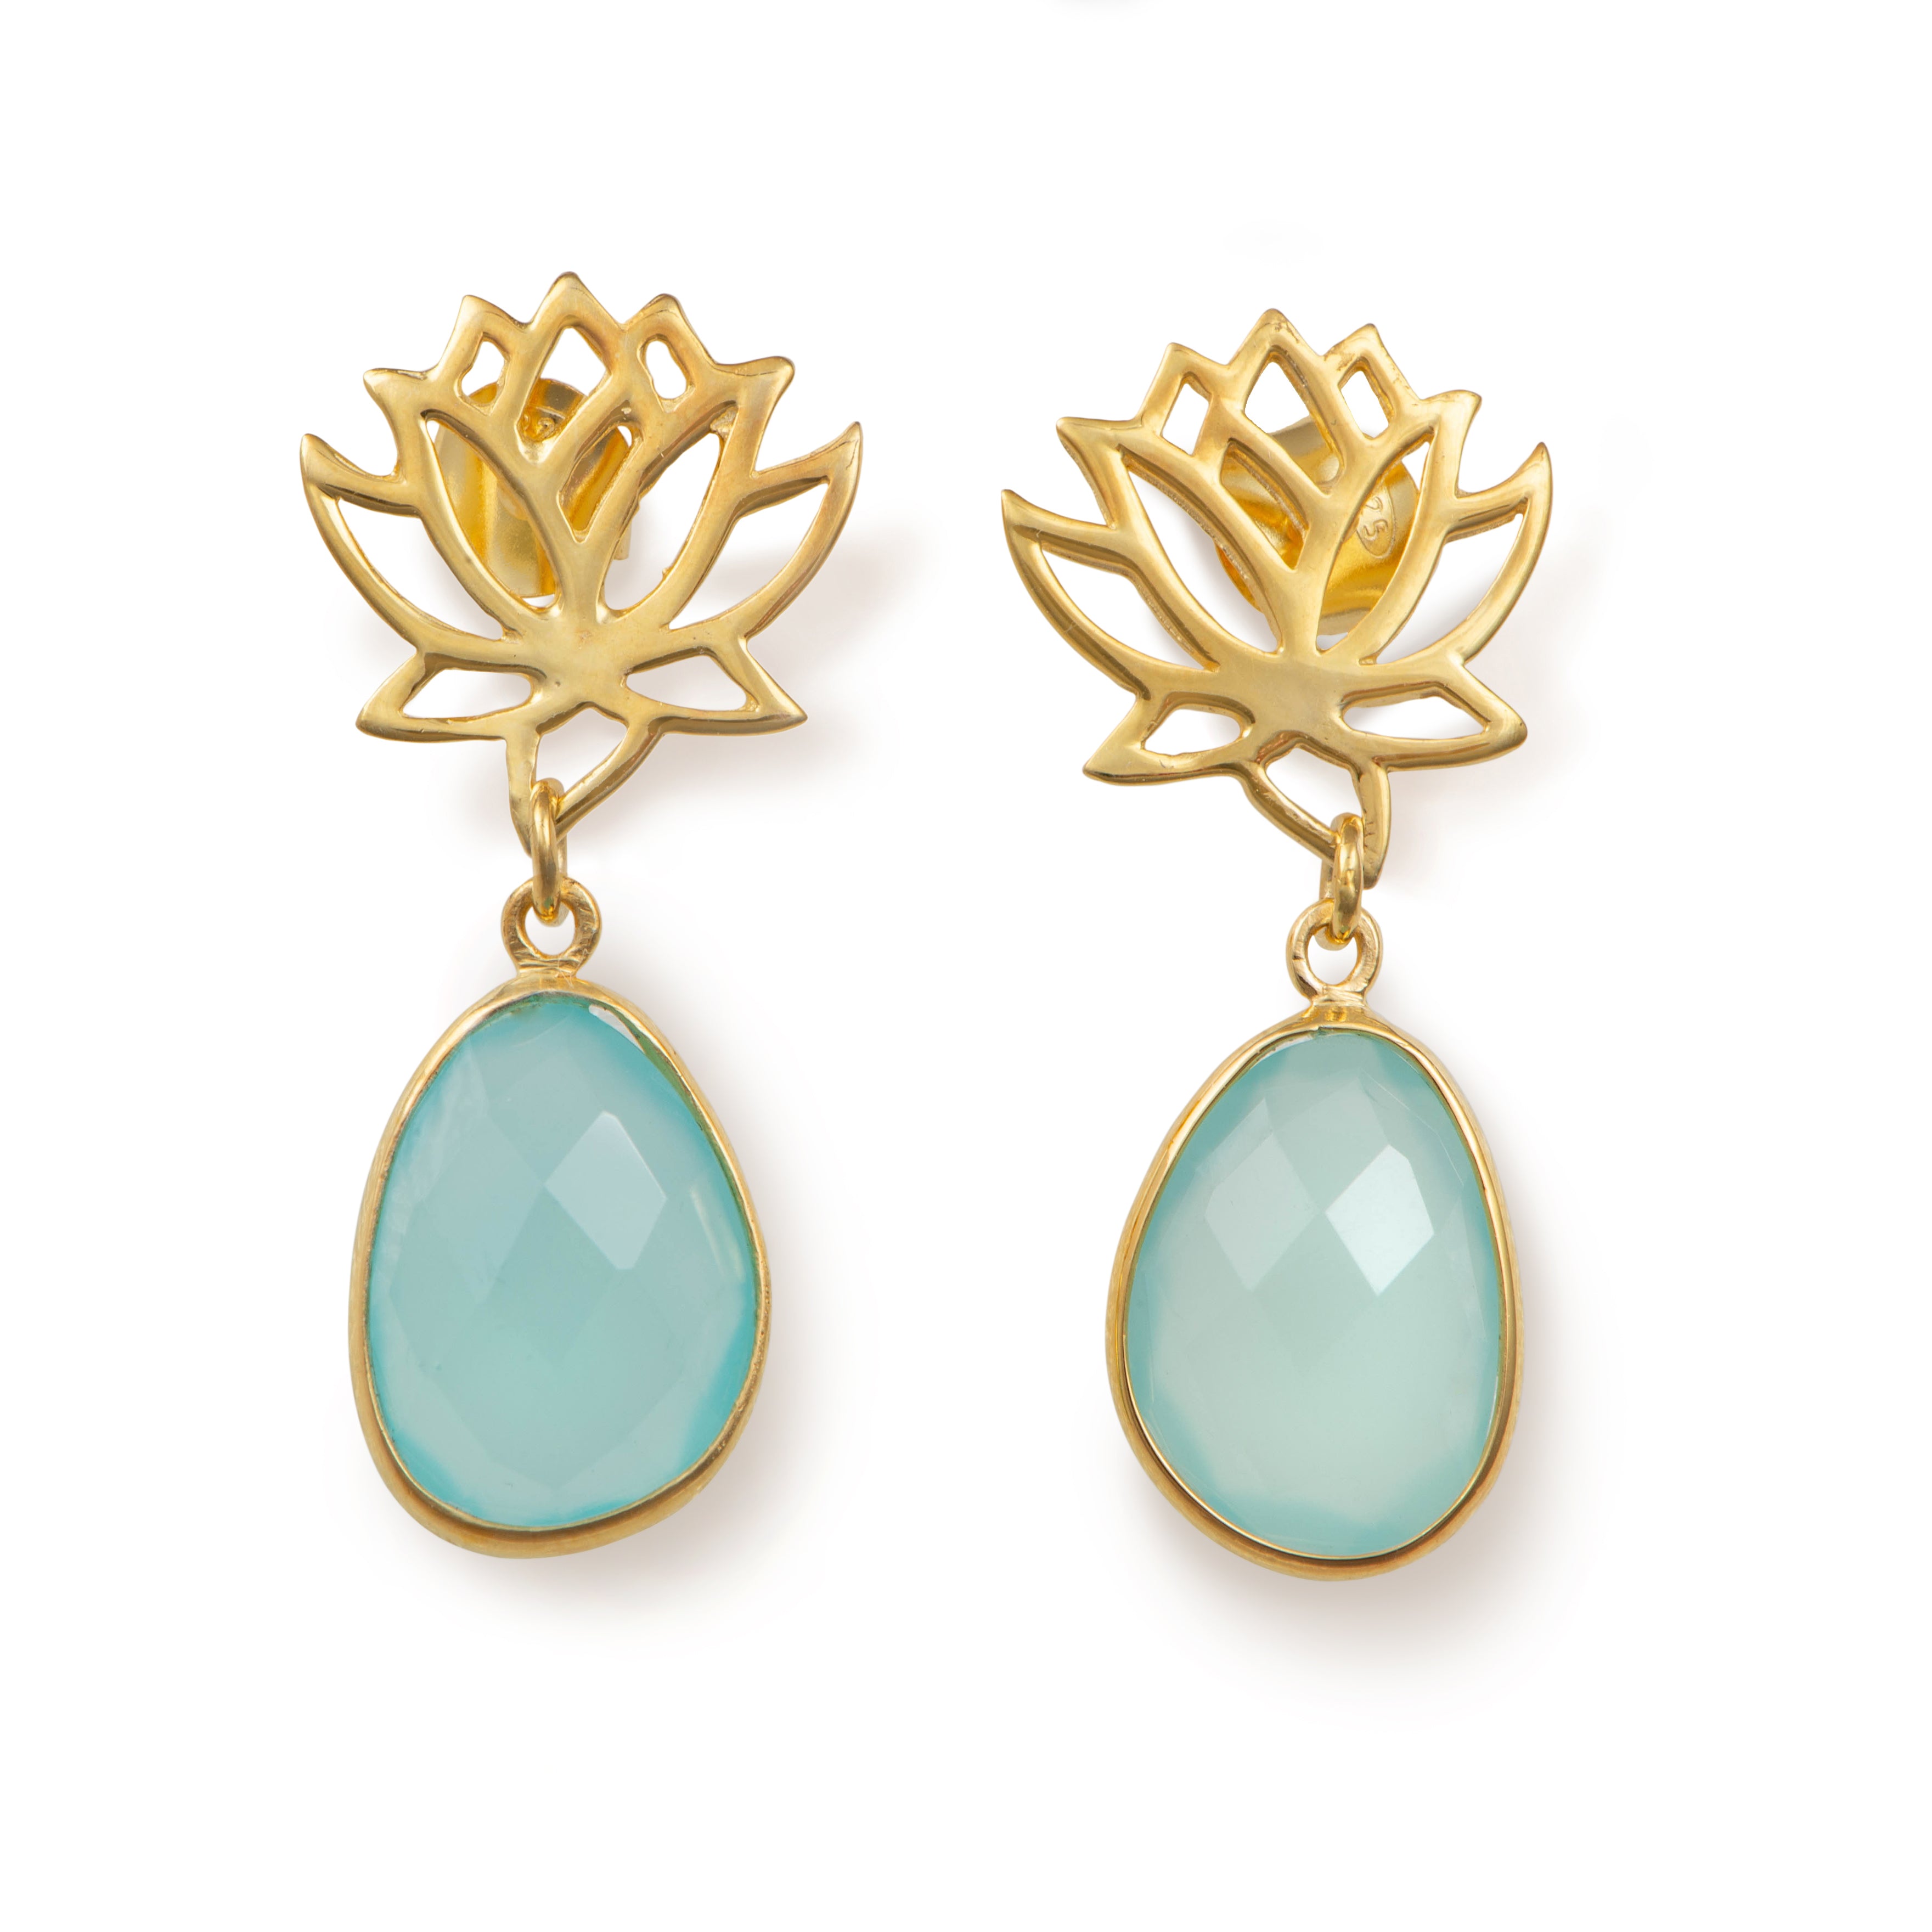 Lotus Earrings in Gold Plated Sterling Silver with an Aqua Chalcedony Gemstone Drop